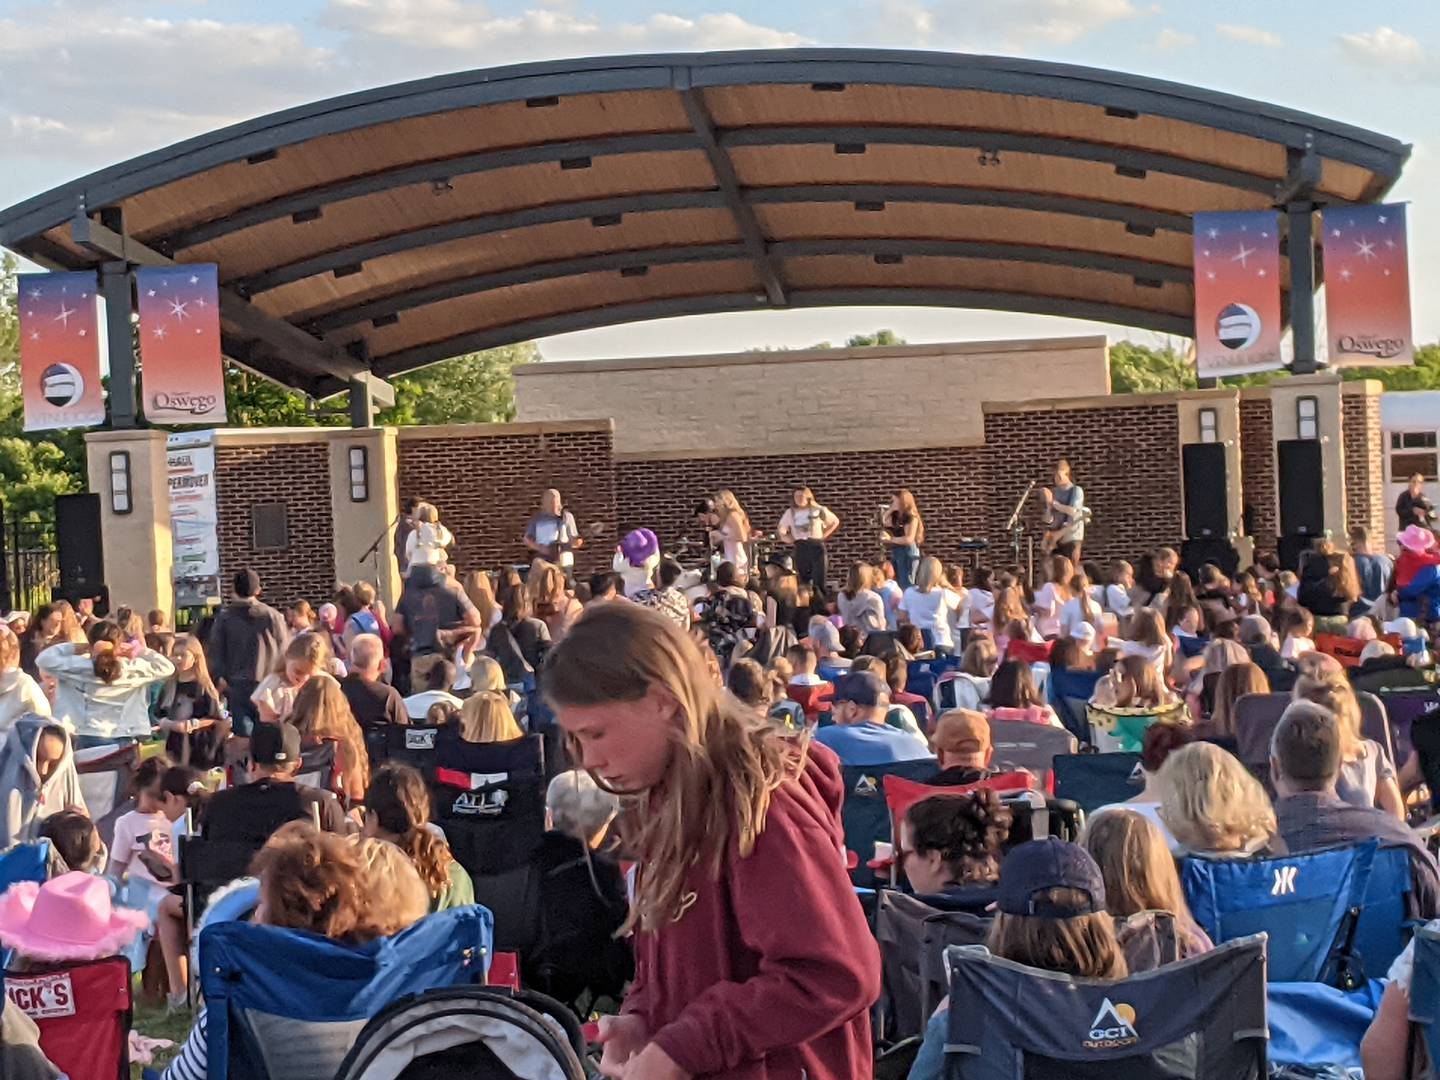 An estimated 3,500 people came to Venue 1012 to hear Sparks Fly – The Taylor Swift Experience. The band helped kick off the third full season of summer fun at the village of Oswego’s outdoor amphitheater, Venue 1012.